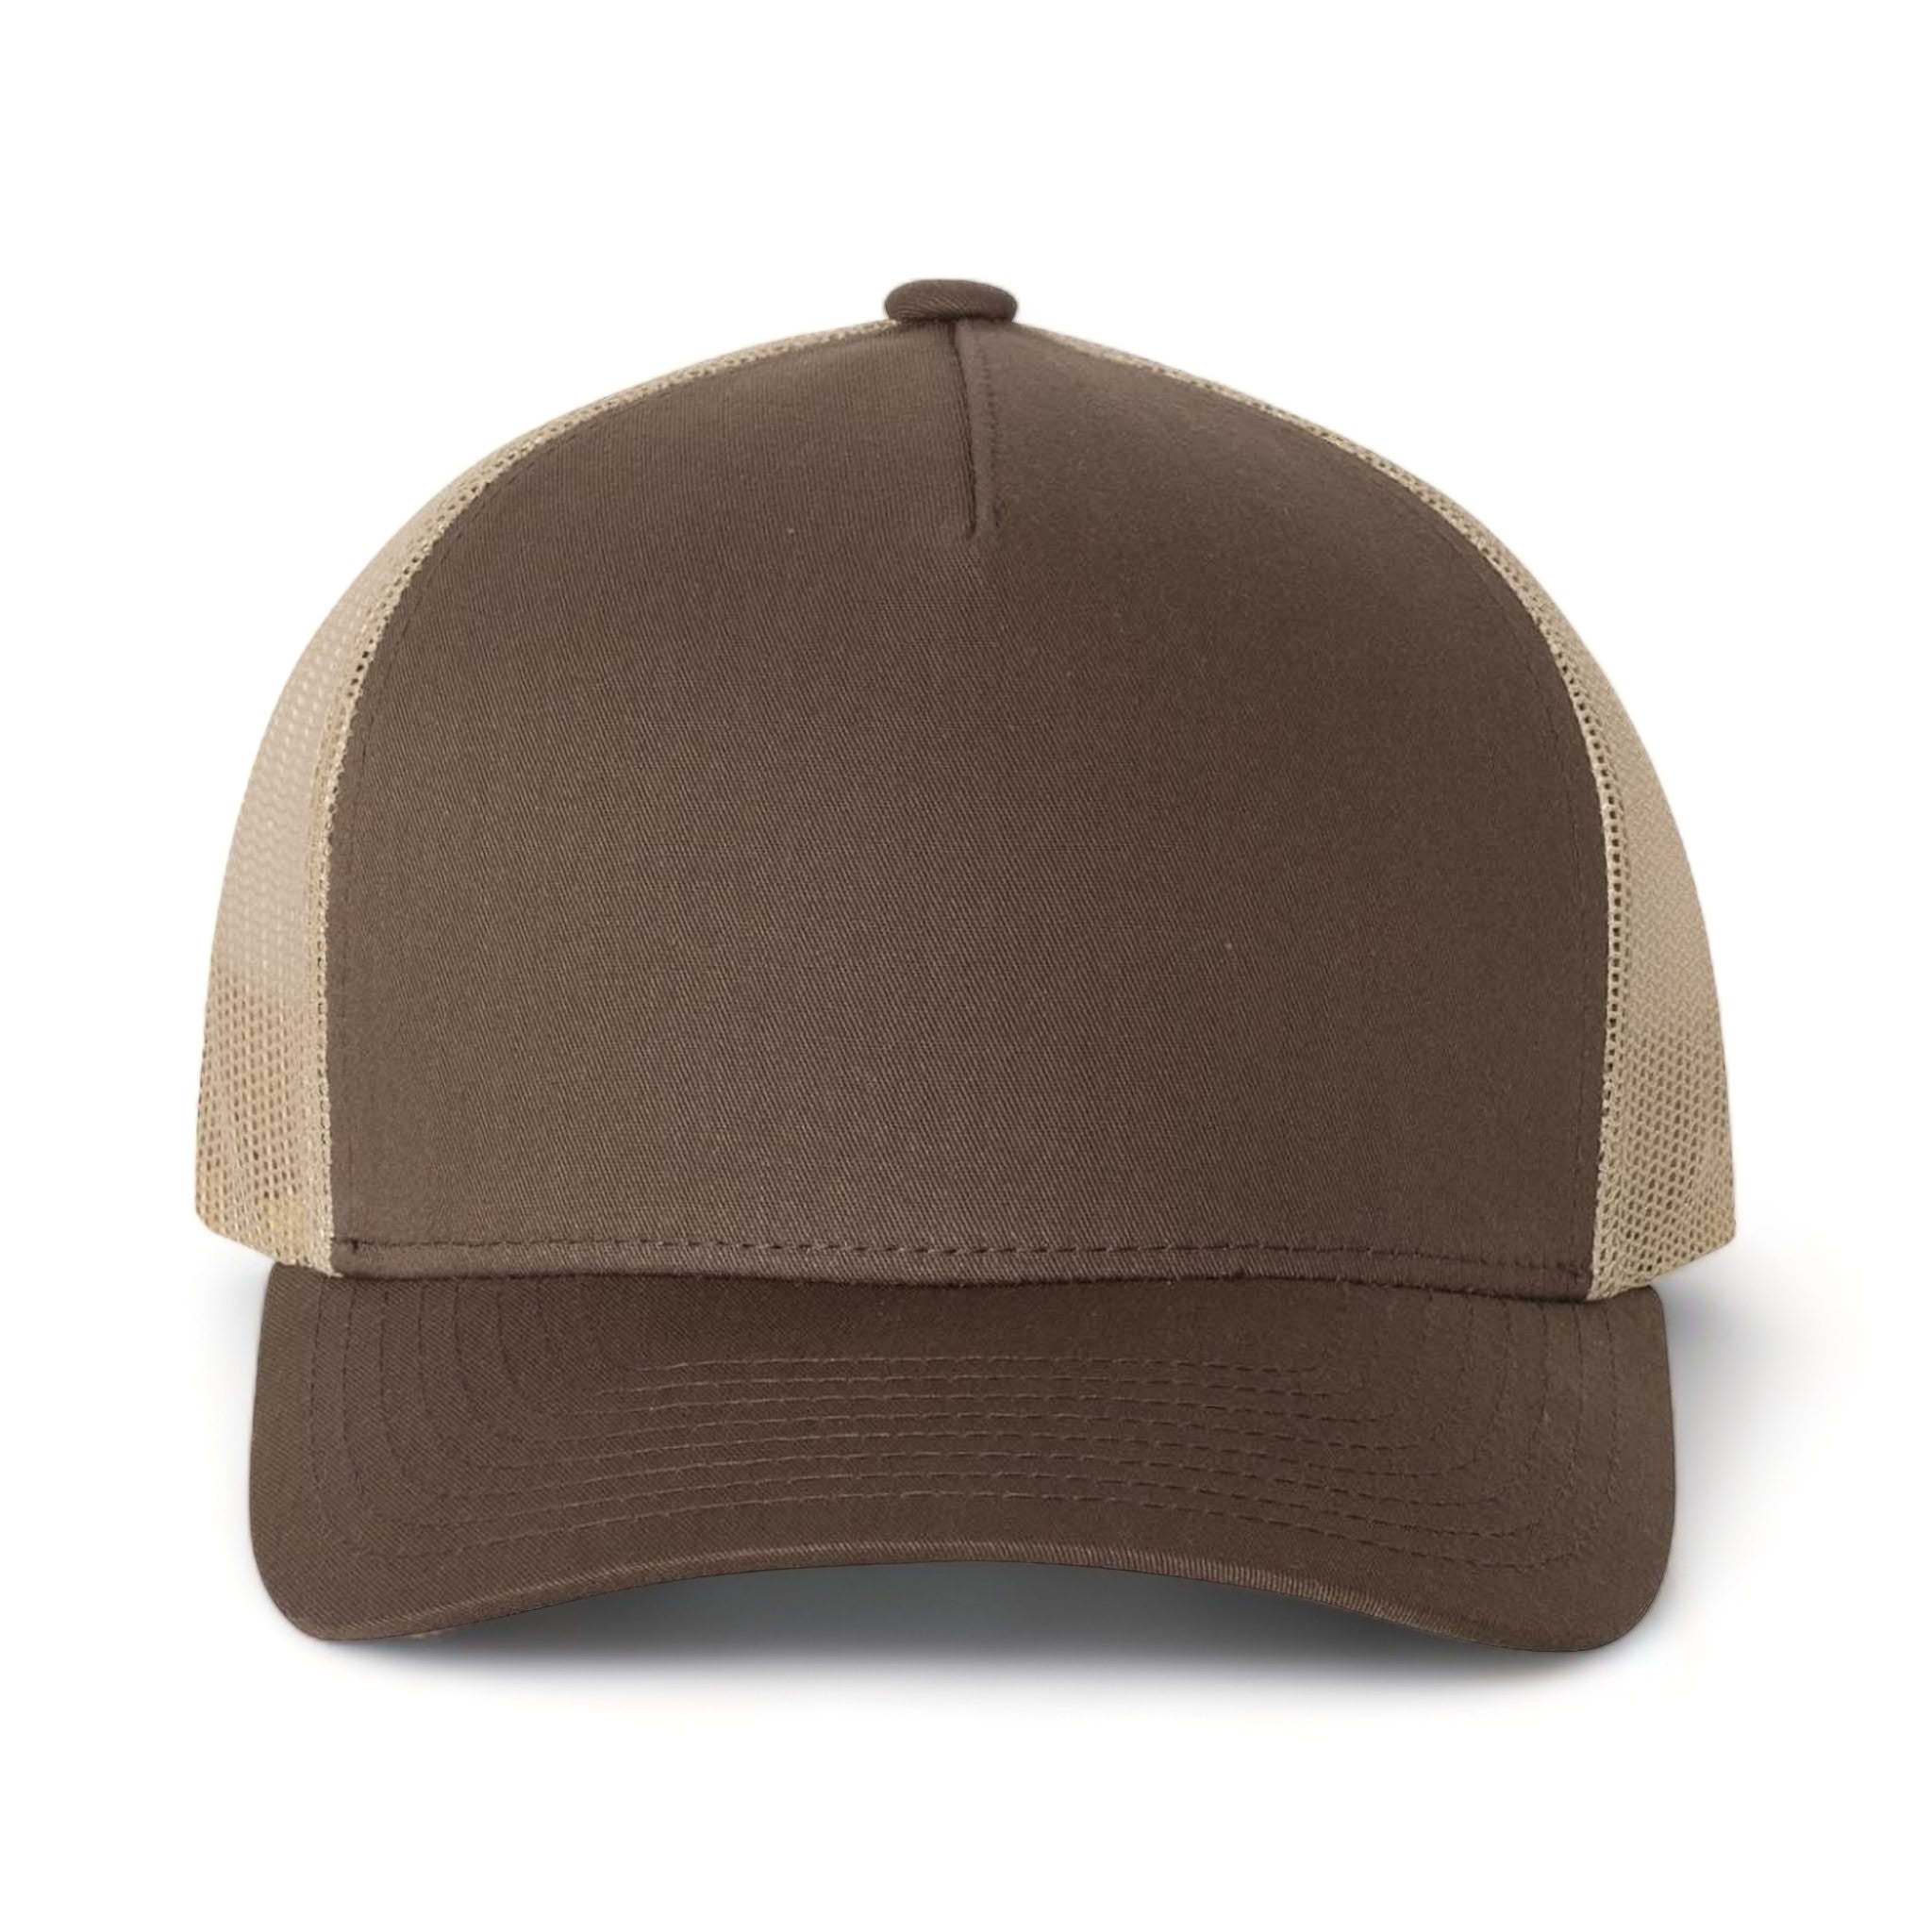 Front view of YP Classics 6506 custom hat in brown and khaki